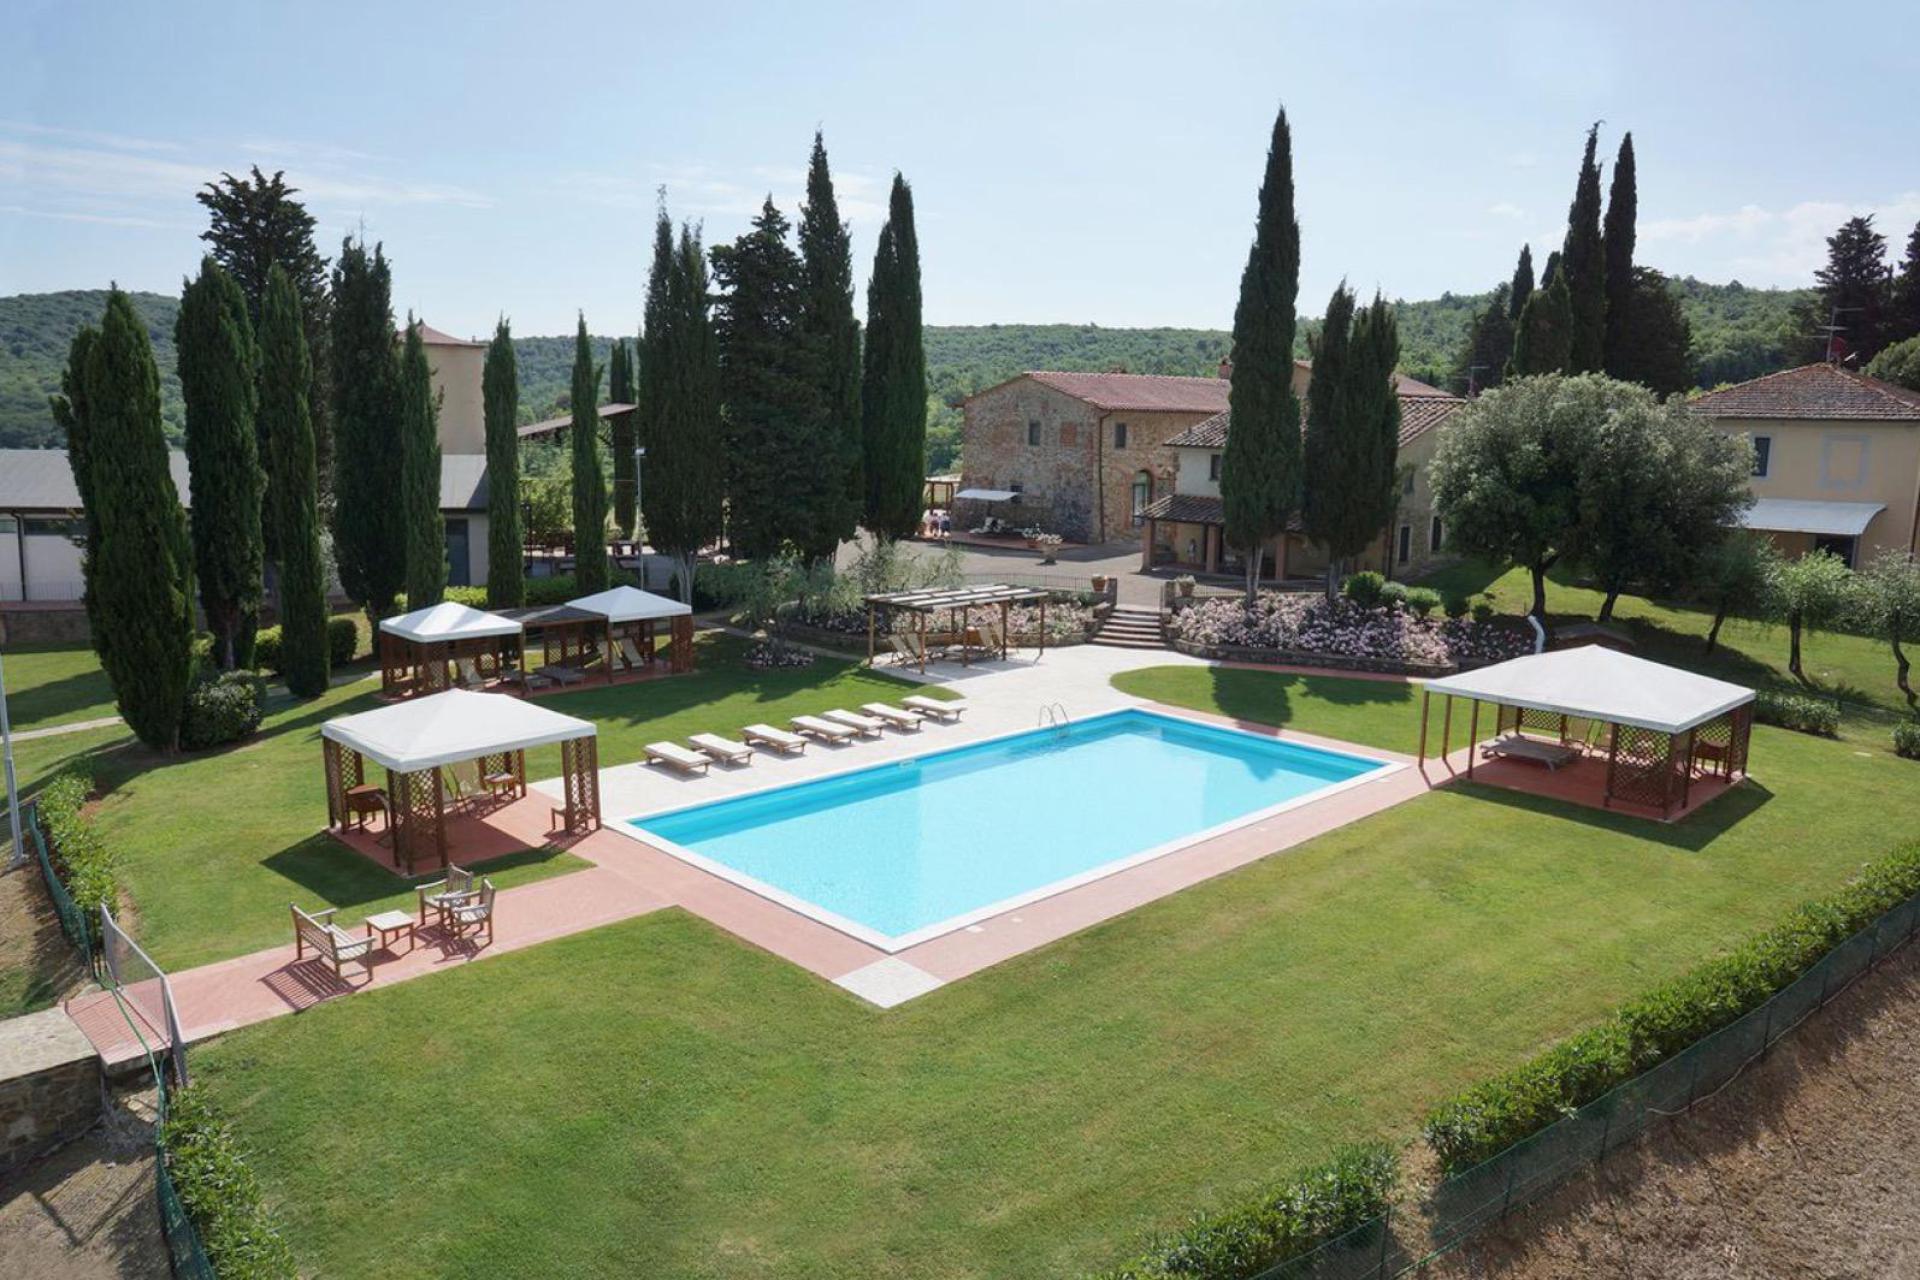 Luxury agriturismo with two beautiful swimming pools